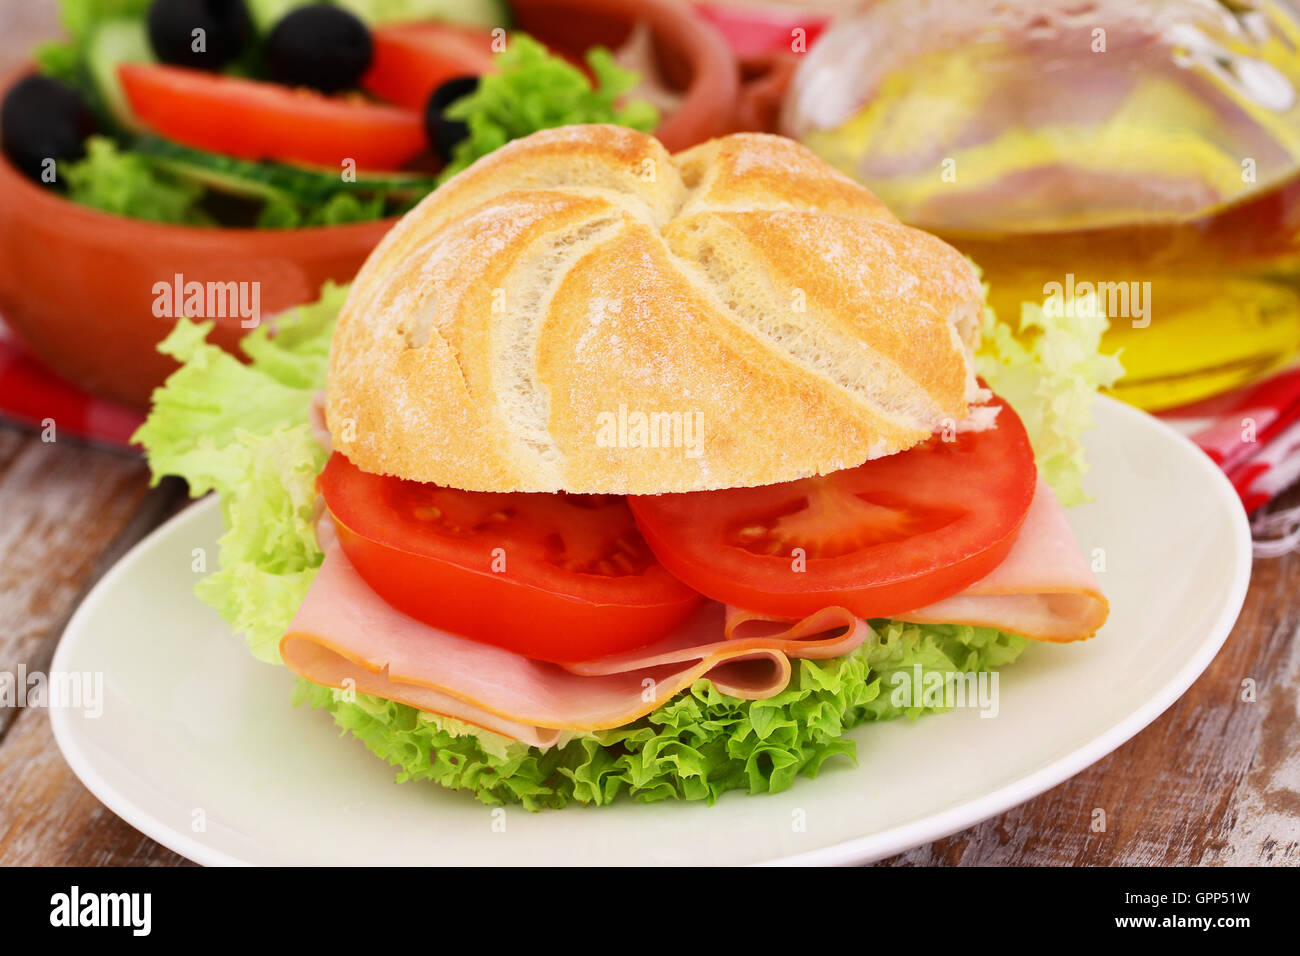 Lunch consisting of bread roll with chicken, tomatoes and lettuce and bowl of salad Stock Photo